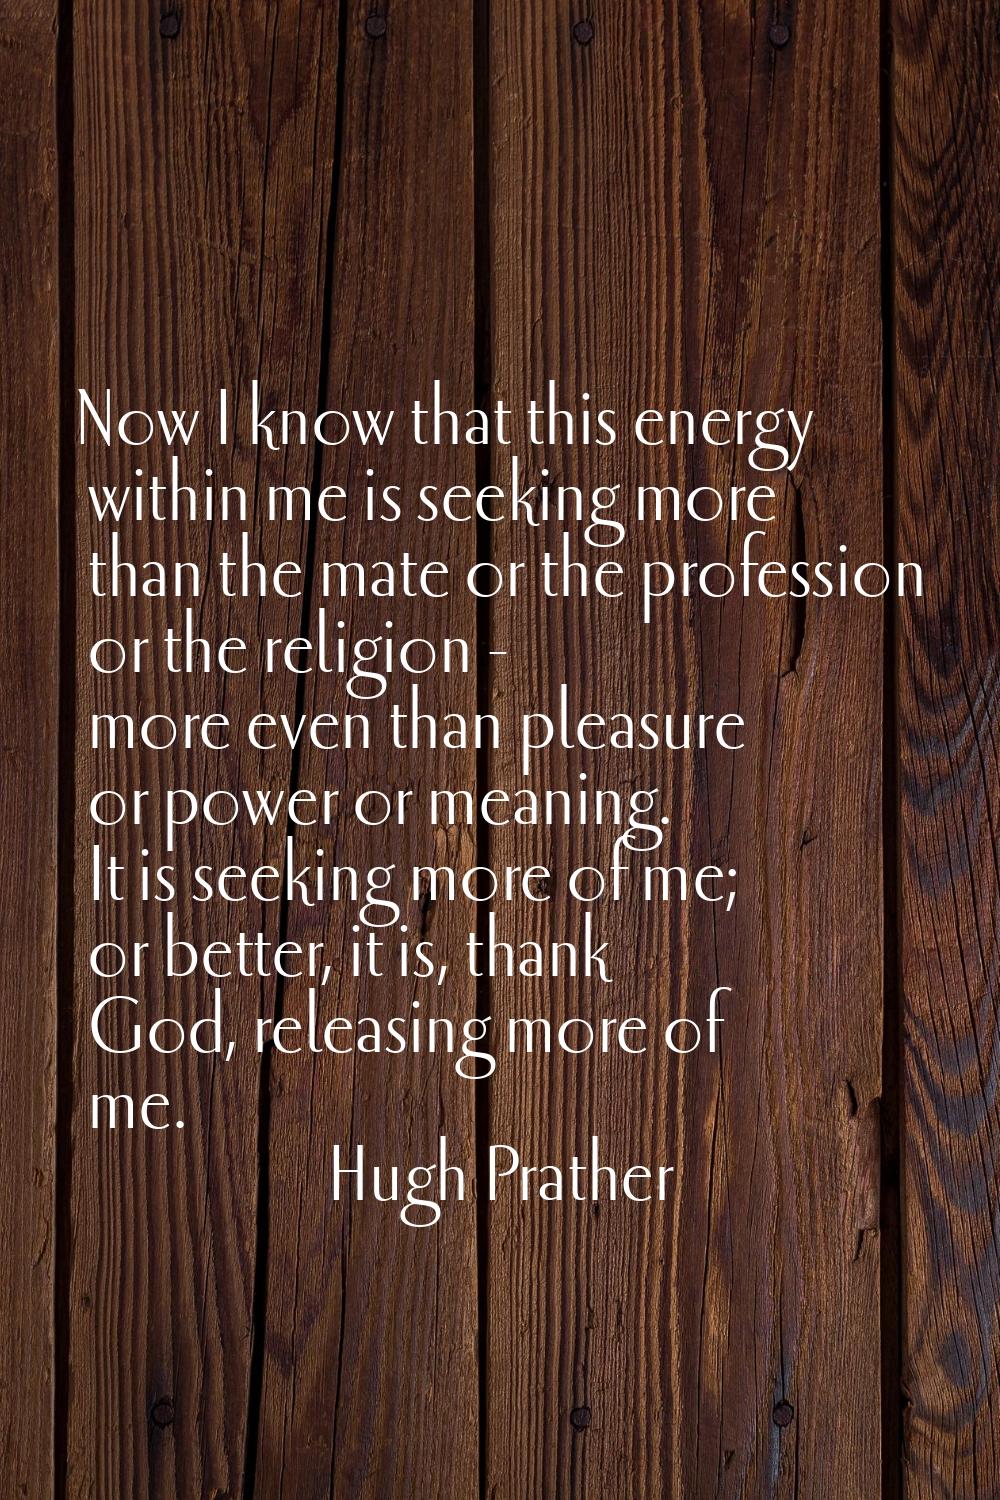 Now I know that this energy within me is seeking more than the mate or the profession or the religi